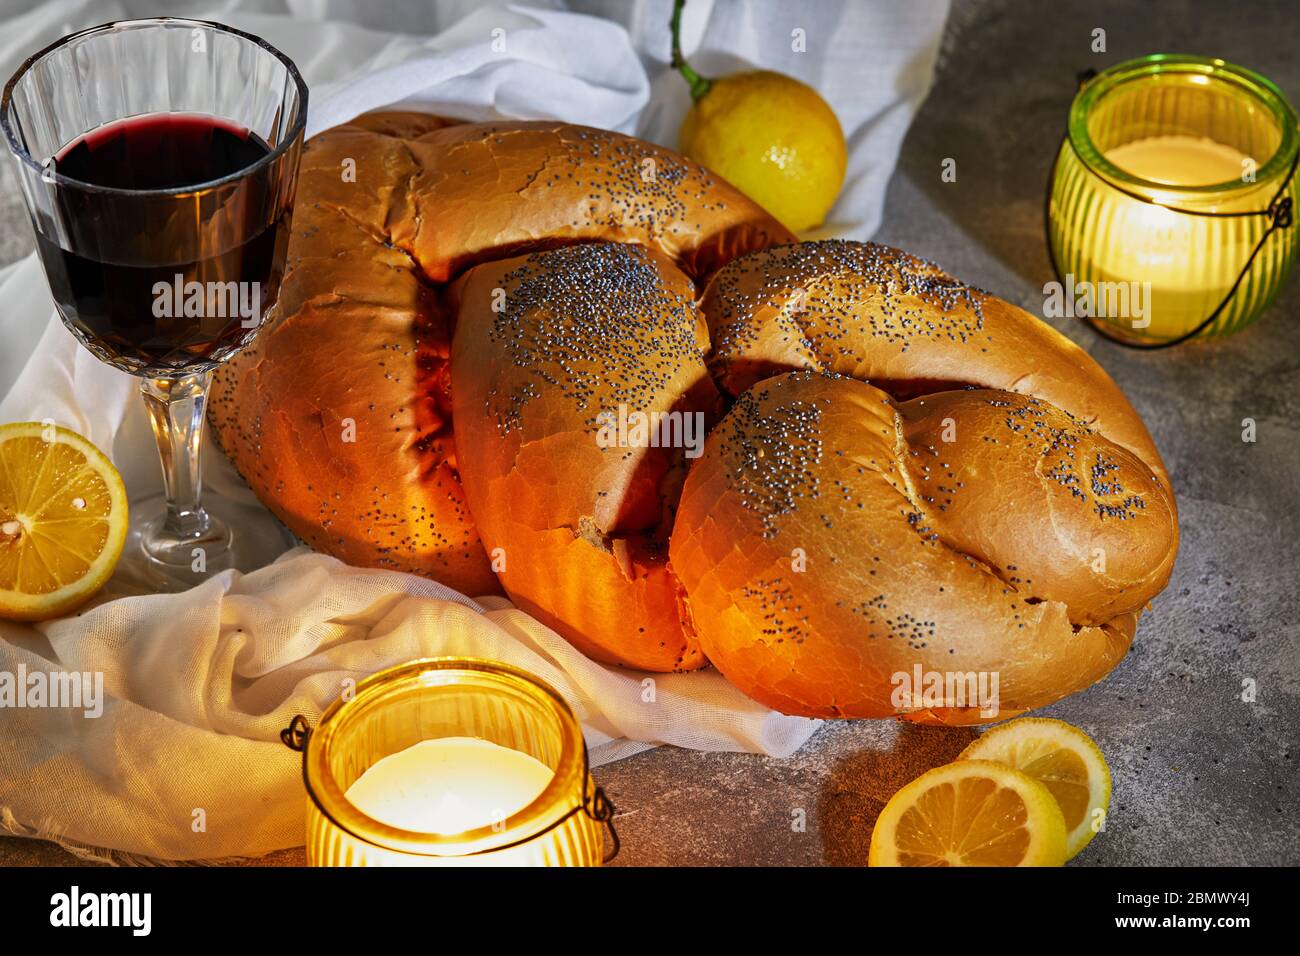 Shabbat challah with a white napkin, with candles, a glass of wine and rustic lemons. Shabbat Shalom Stock Photo